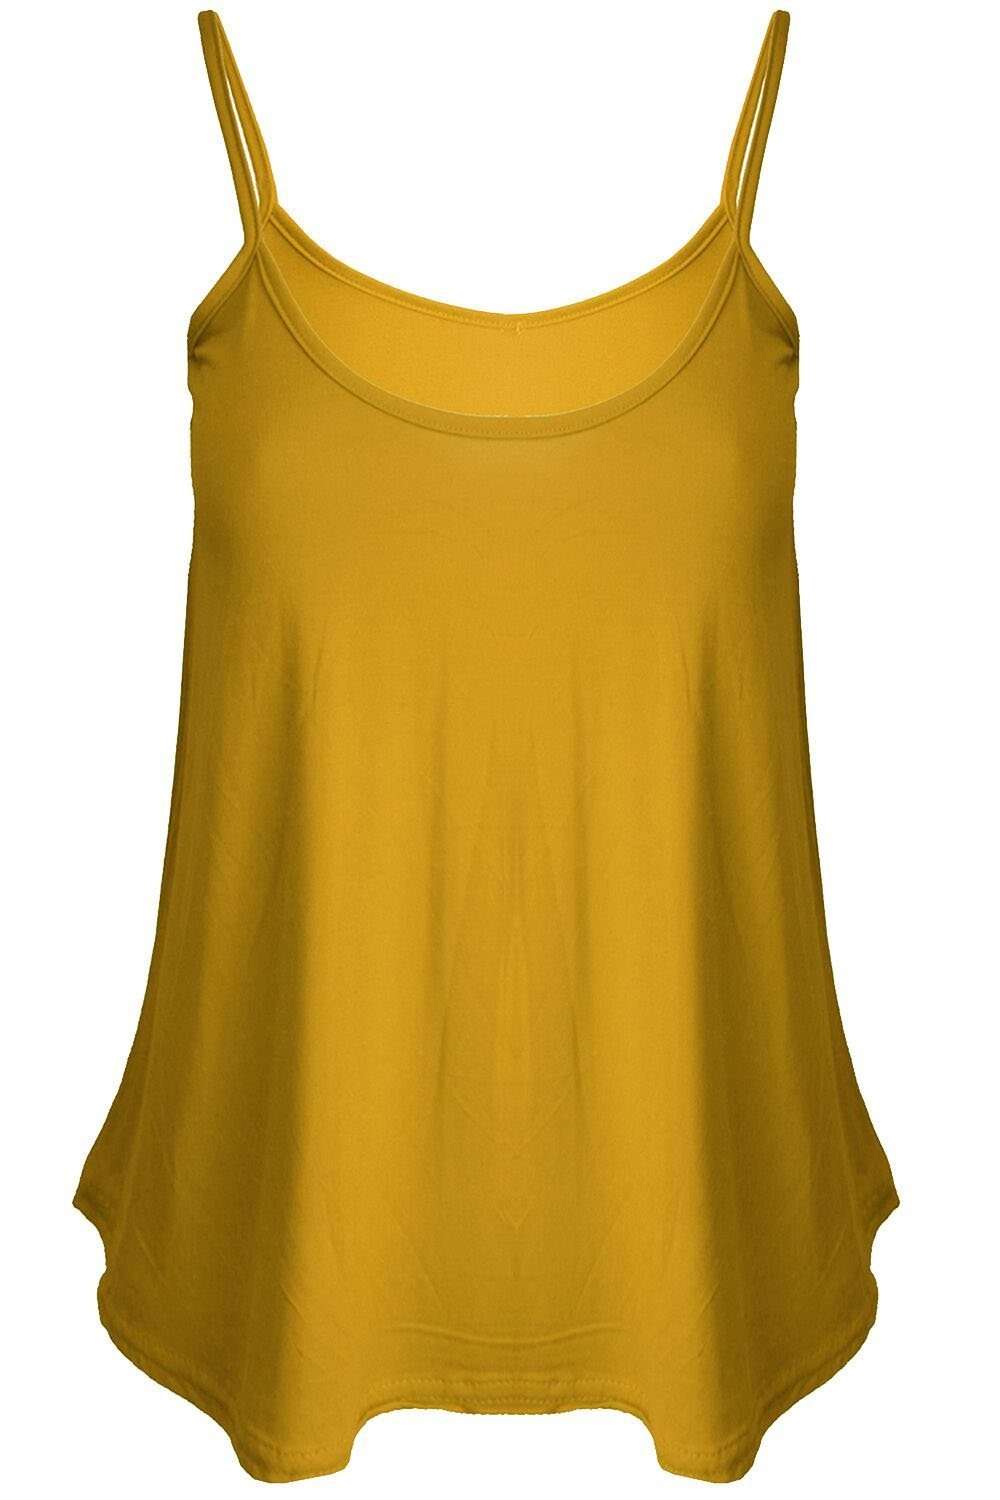 Mustard Strappy Basic Cami Swing Top - bejealous-com